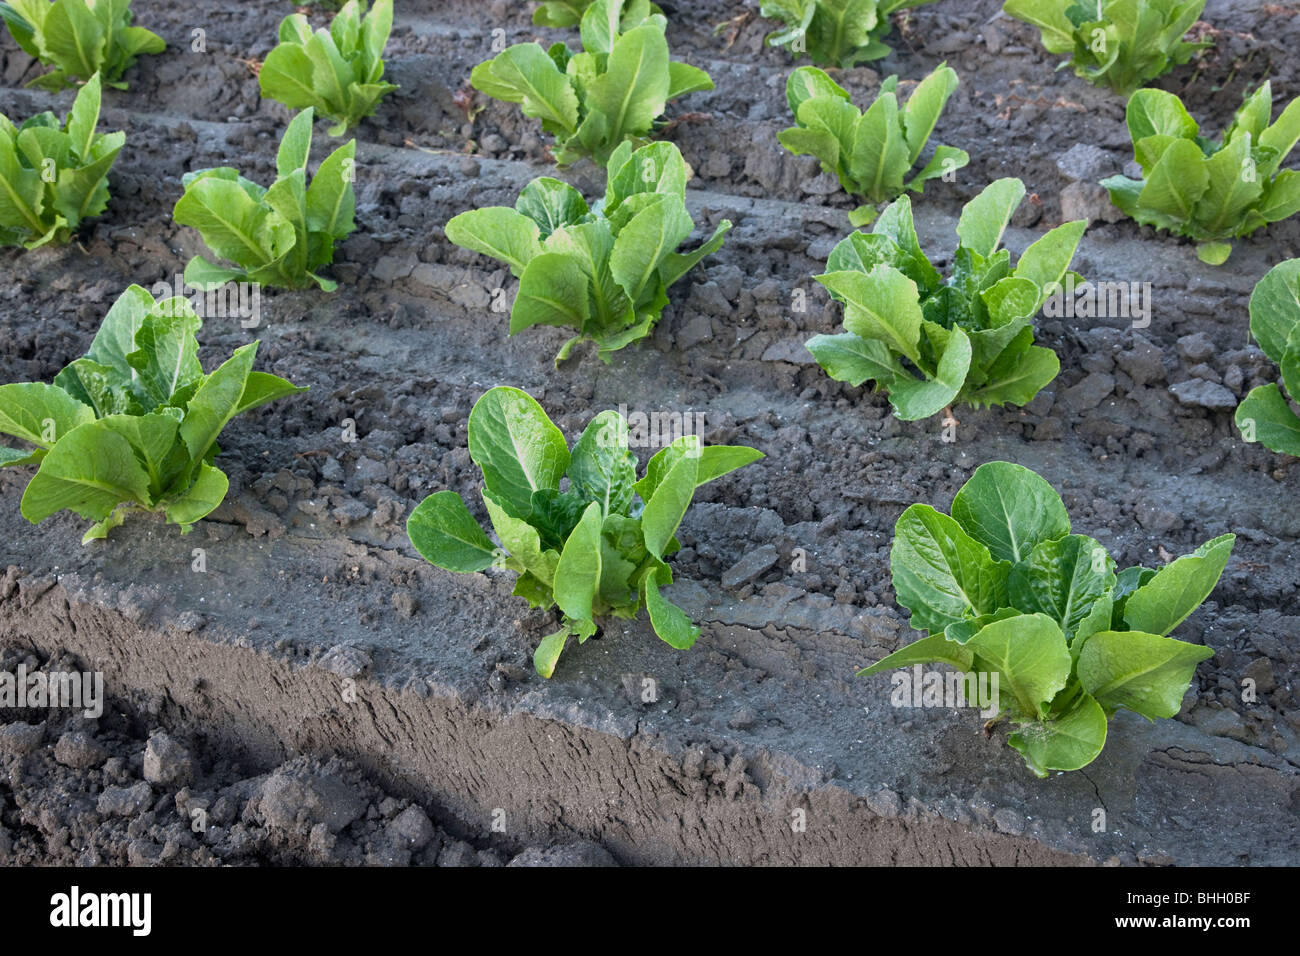 Lettuce 'Romaine', young plants growing. Stock Photo